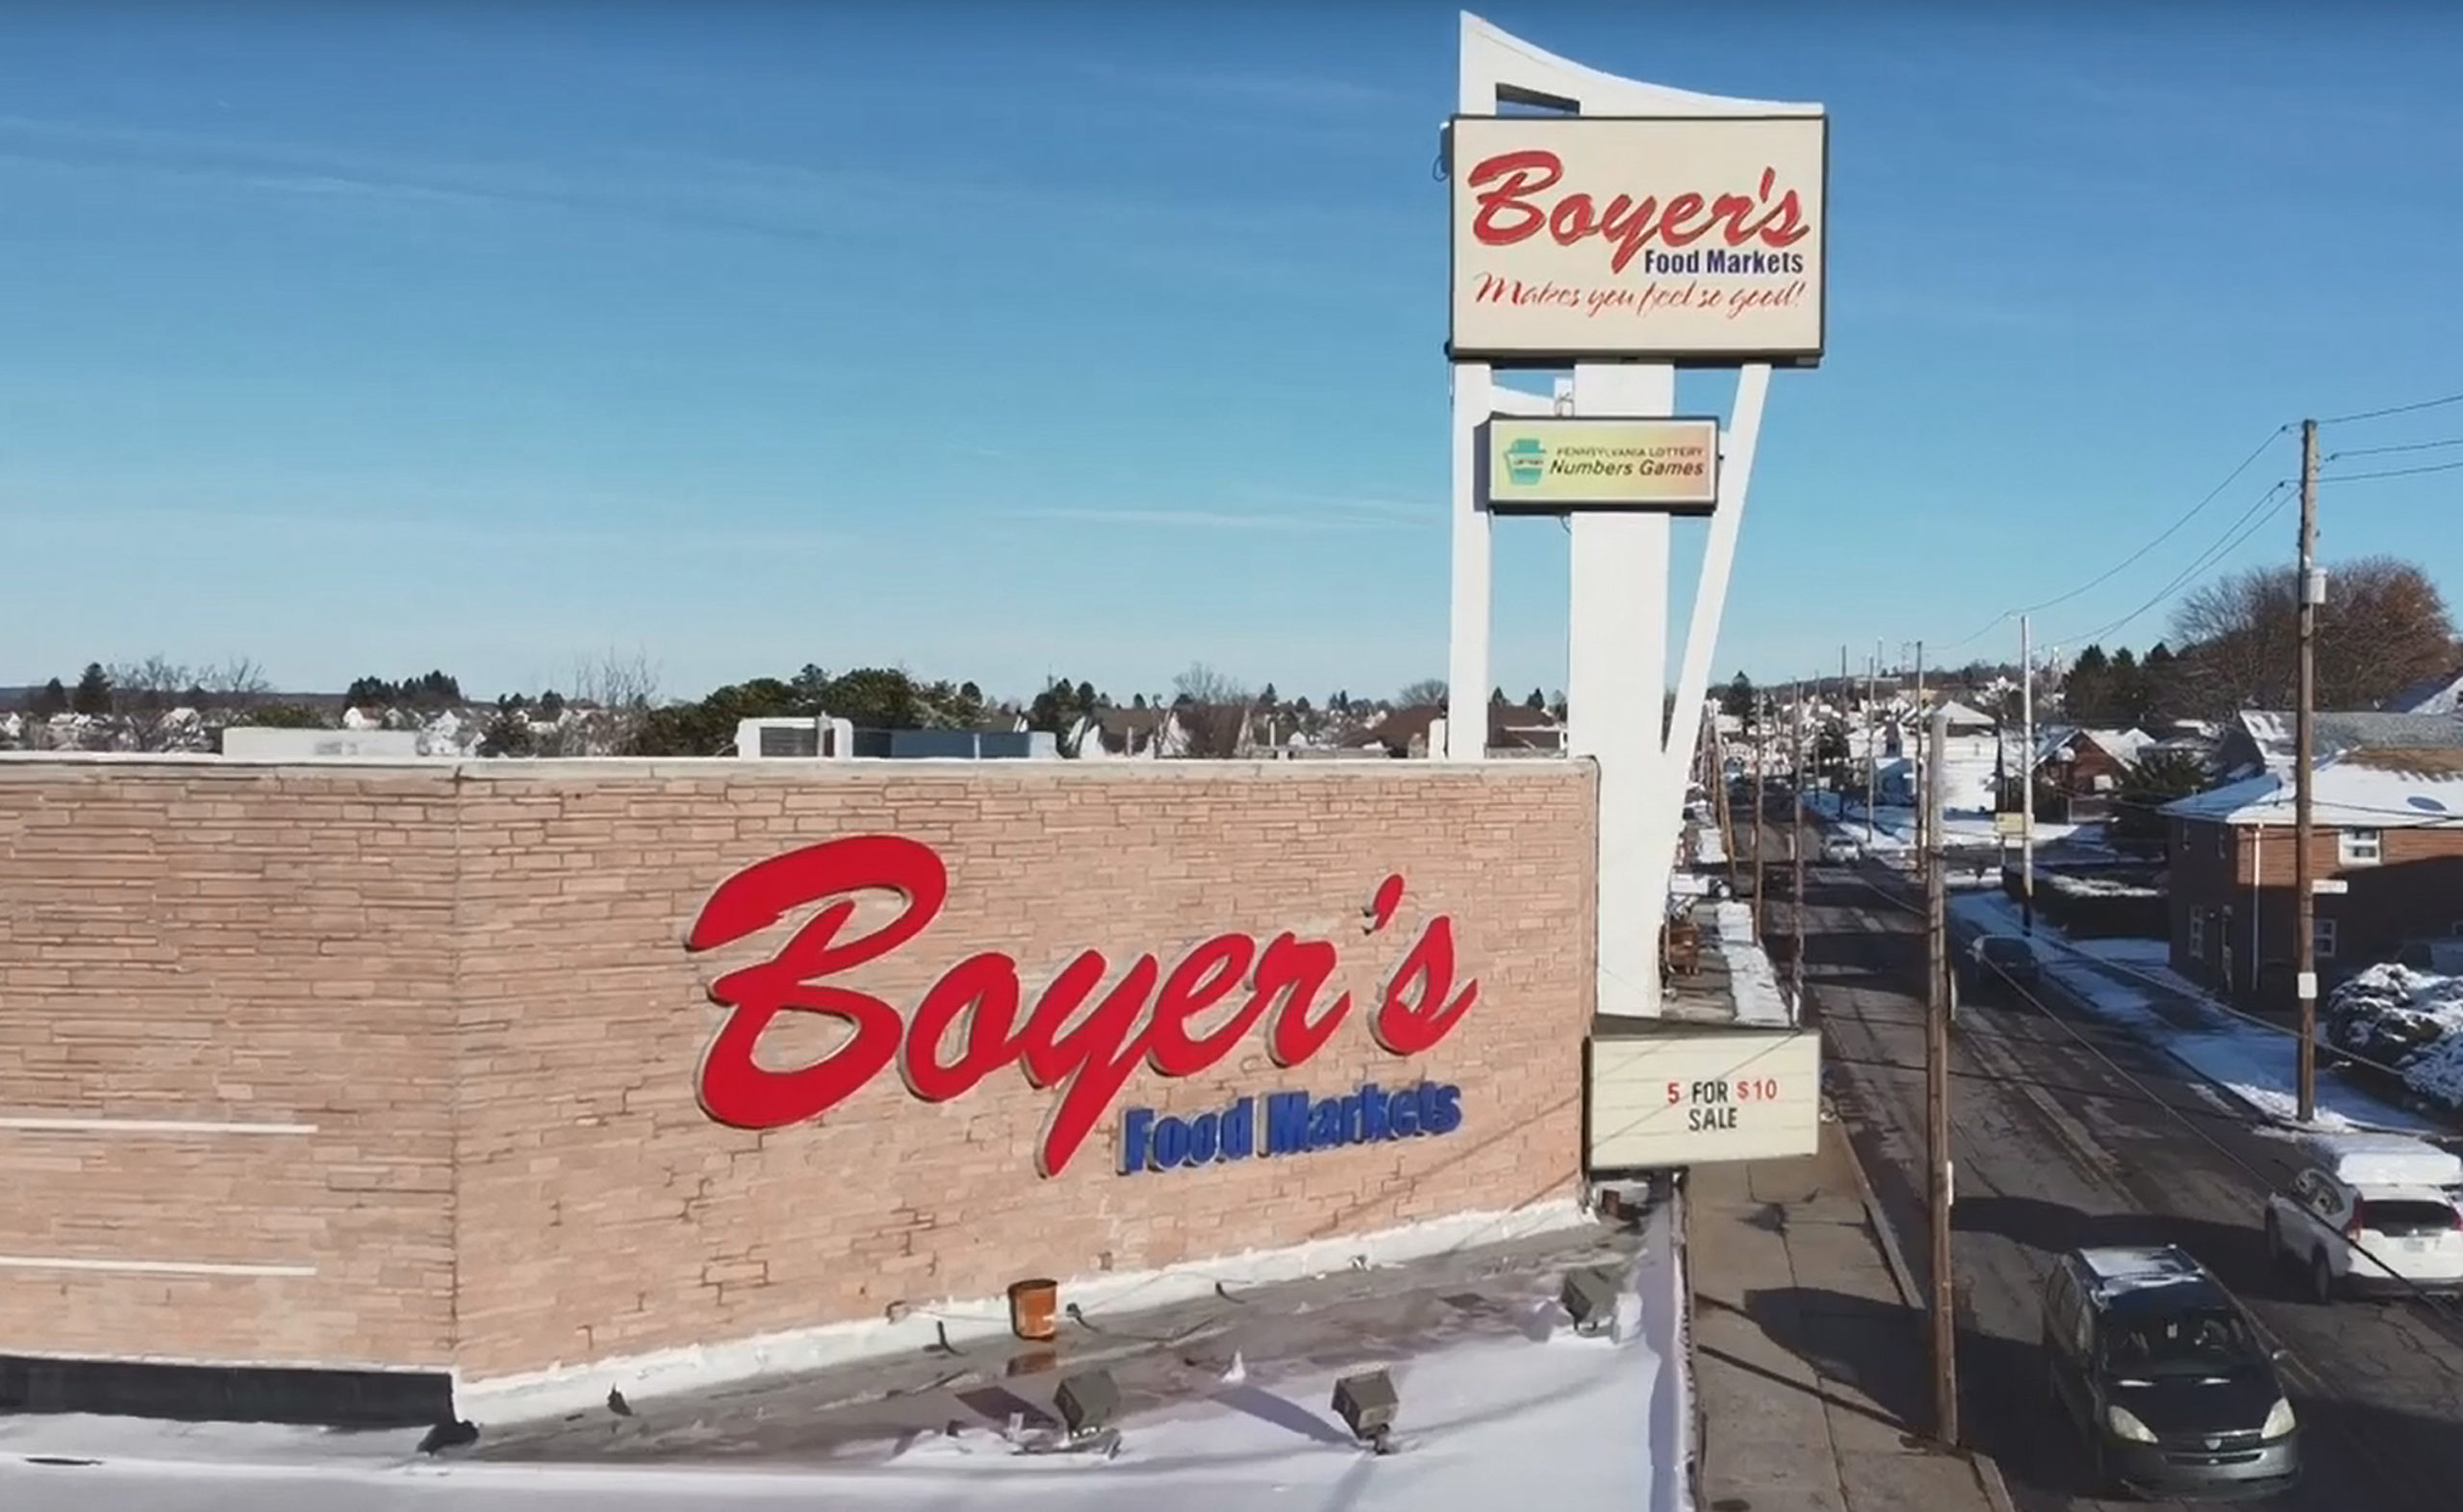 Shopping for Savings with Boyer’s Food Market